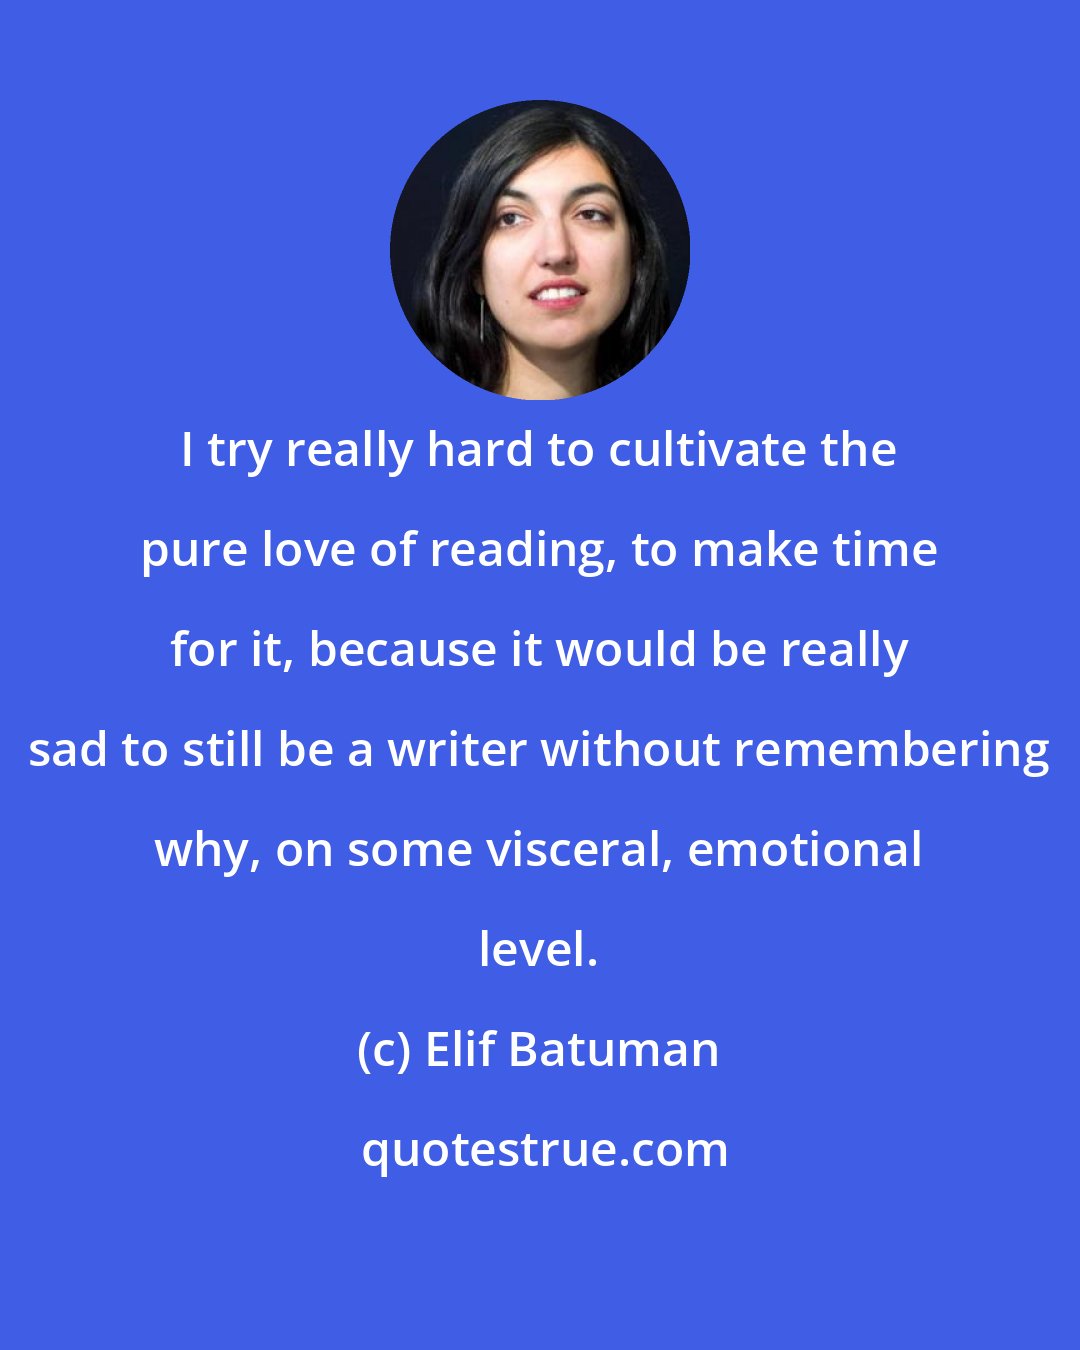 Elif Batuman: I try really hard to cultivate the pure love of reading, to make time for it, because it would be really sad to still be a writer without remembering why, on some visceral, emotional level.